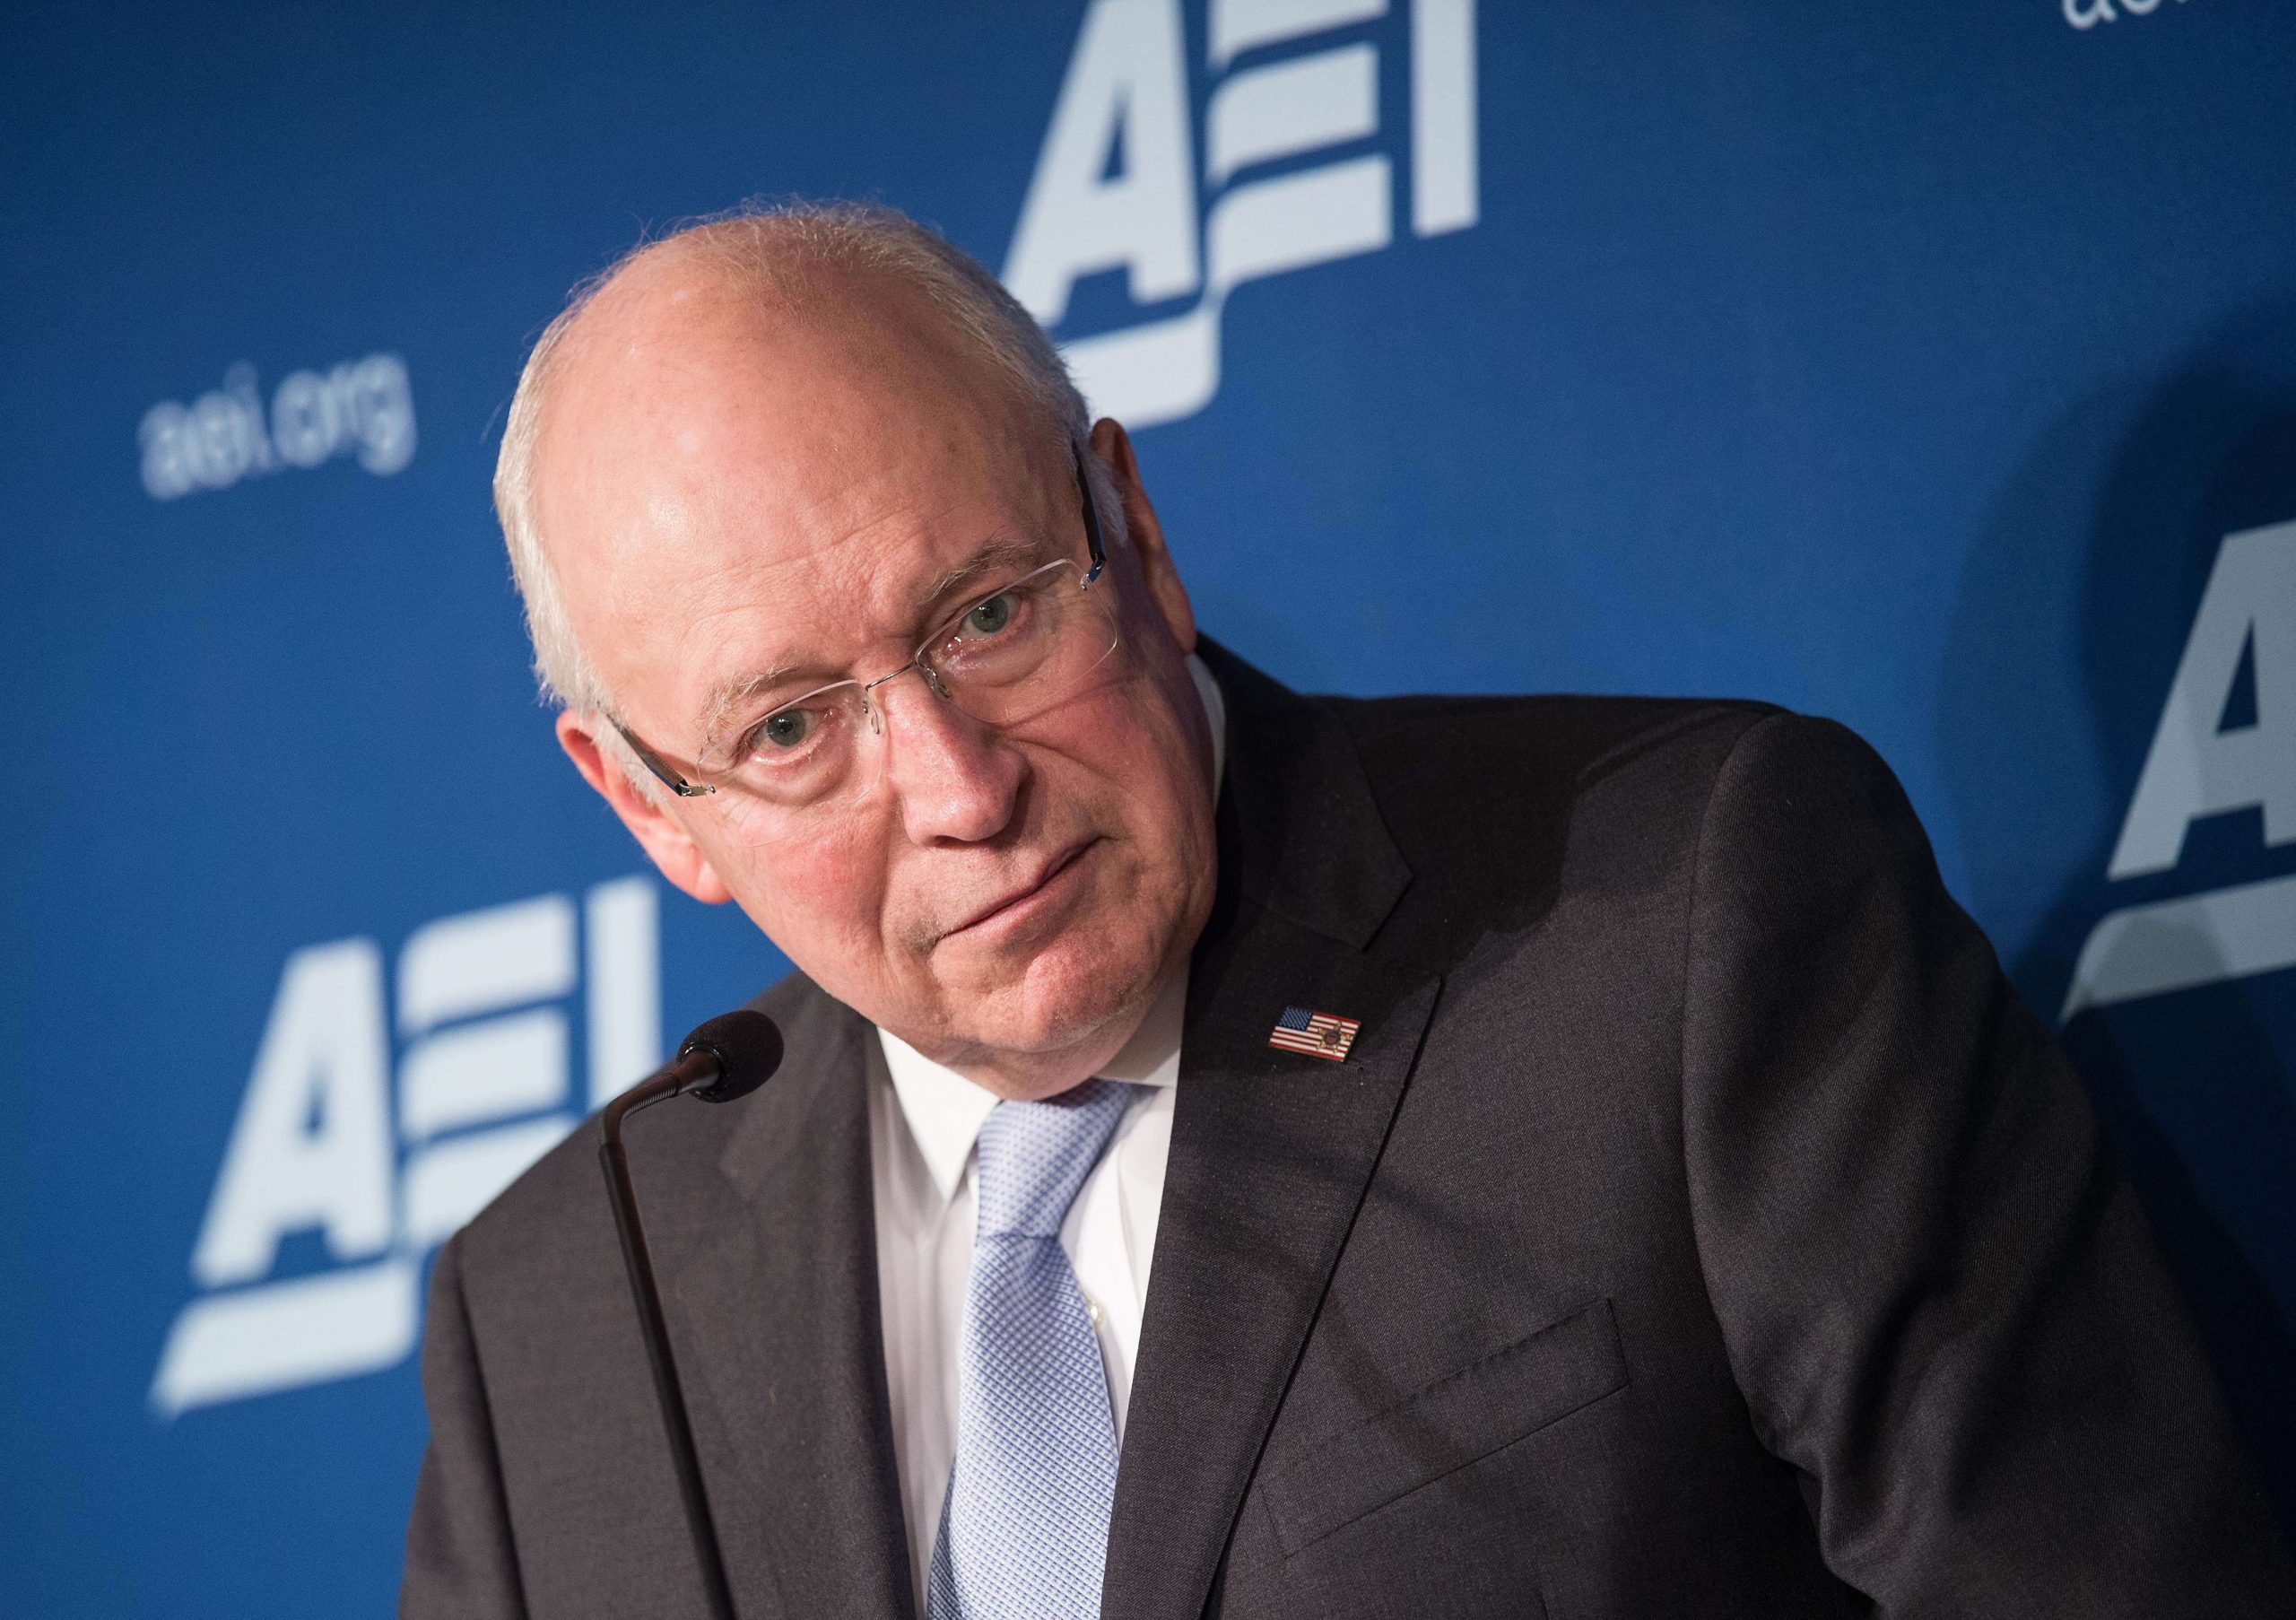 The War Crime of US Invasion to Iraq: Who is Dick Cheney?